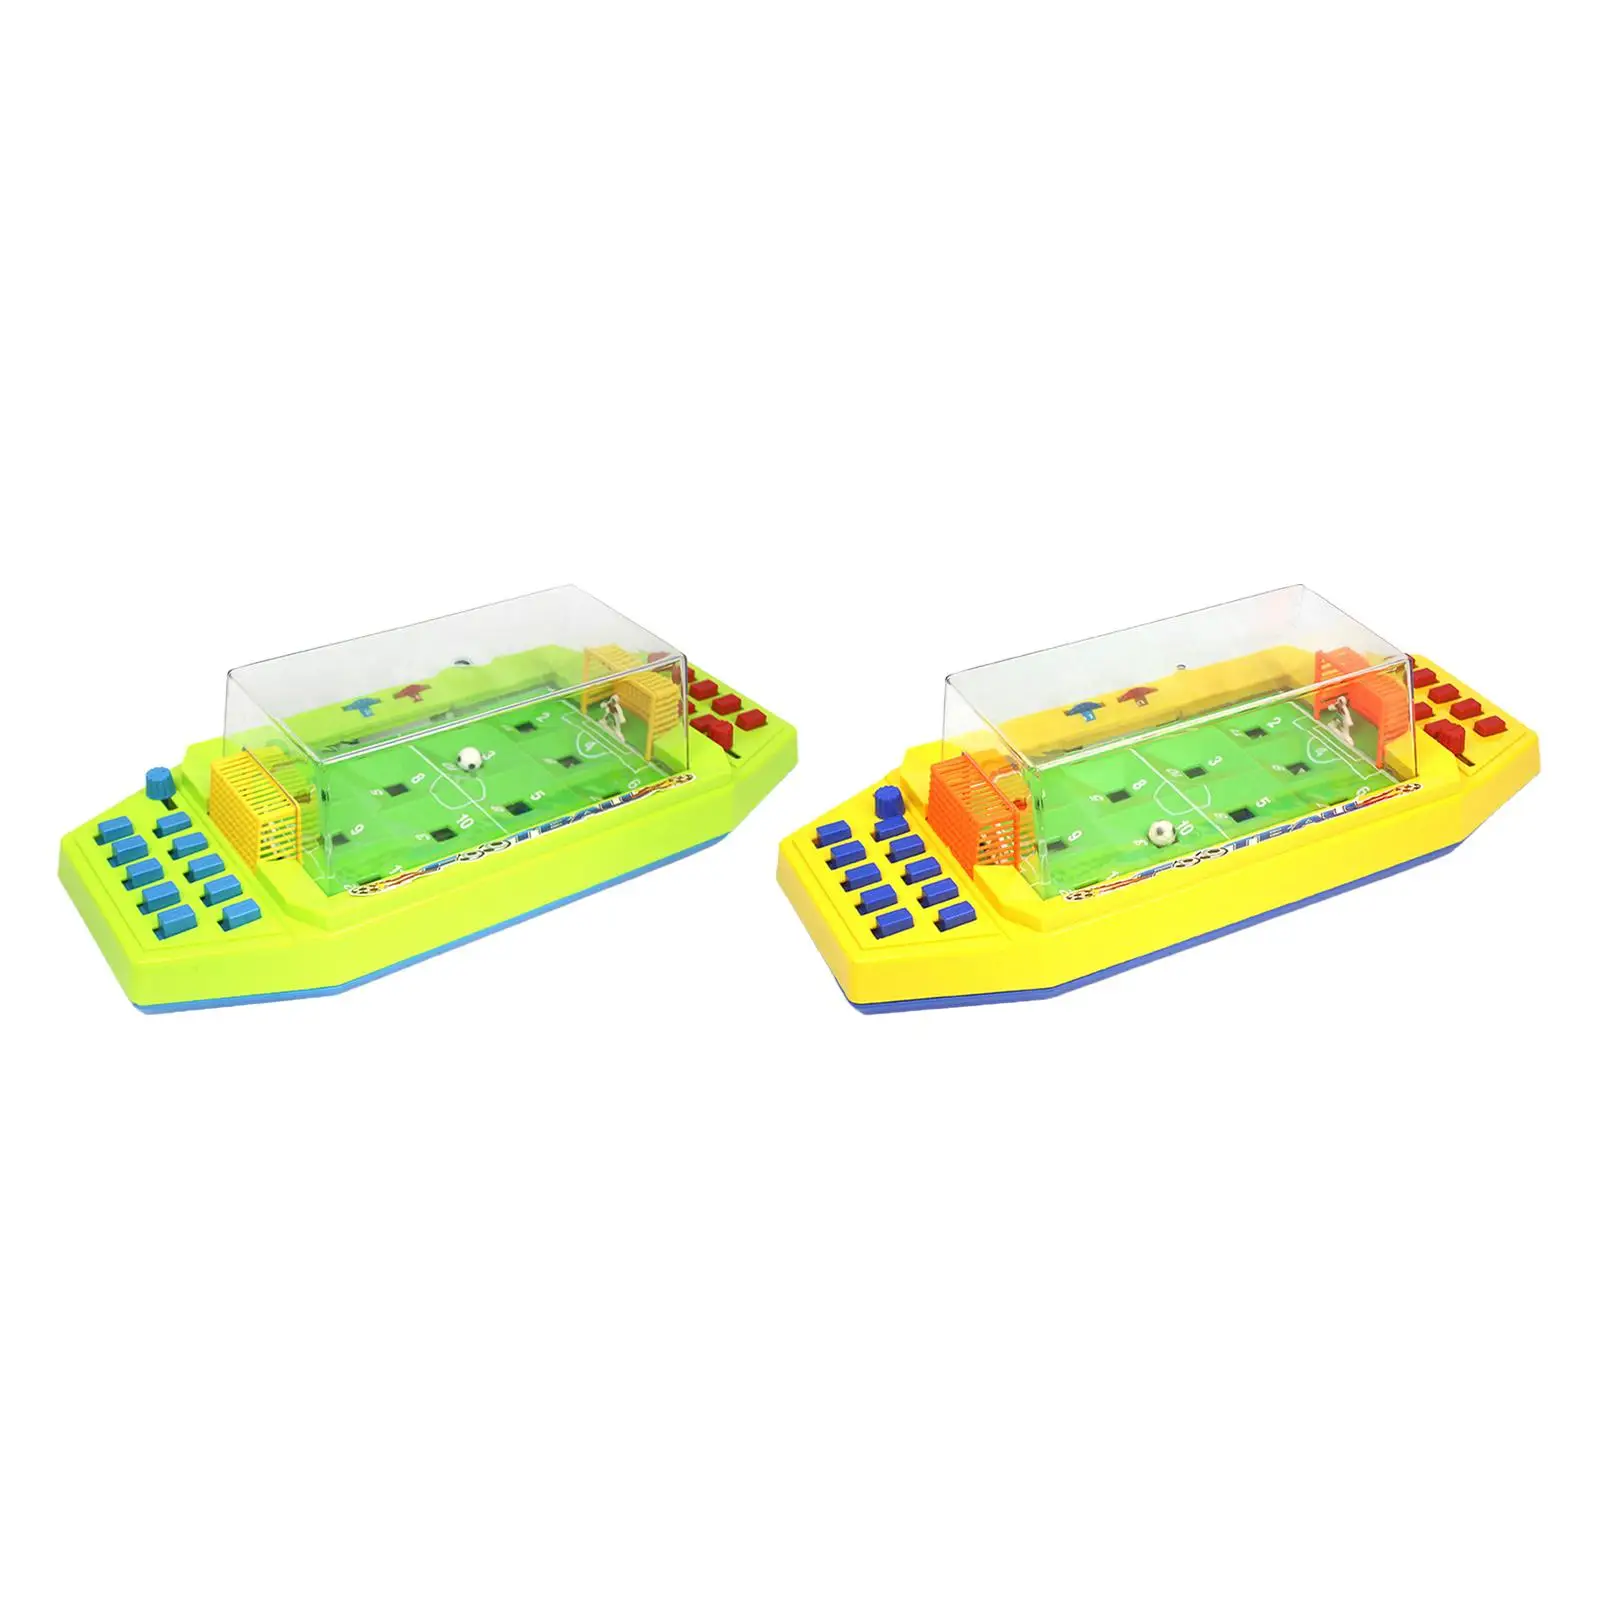 Football Board Game Hand Eye Coordination Soccer Tabletop Game Mini Tabletop Football Playroom Family Game Parties Entertainment